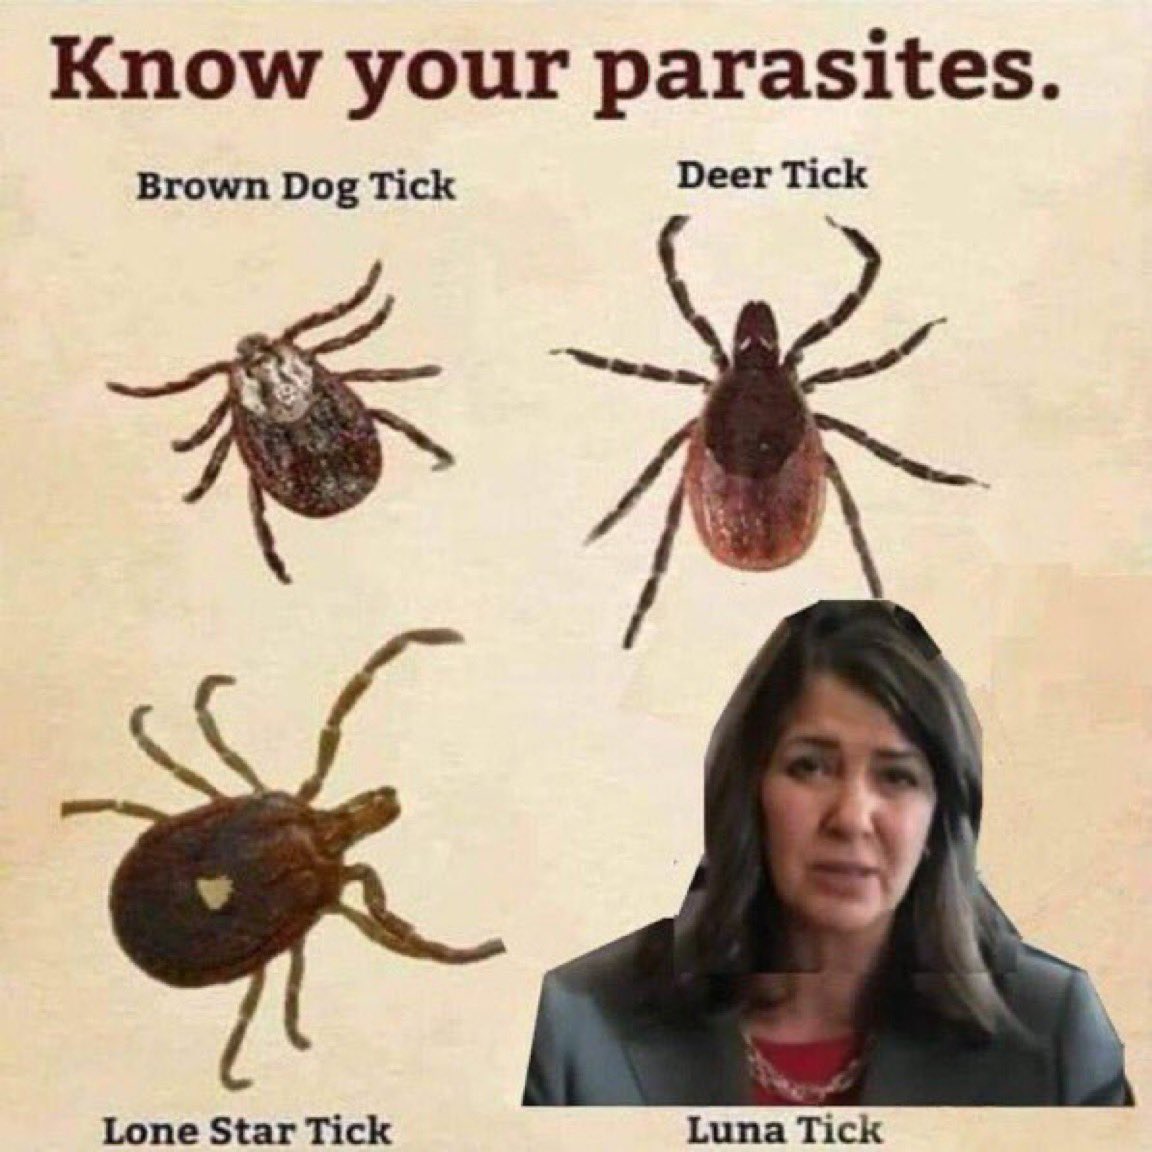 PSA! 

With the warmer weather on the way, it's important to educate yourself about the different ticks that can be found all over Alberta.

Learn to recognize this and all the UCP varieties to keep your friends and family safe from these parasites!
#abpoli #ableg #abhealth